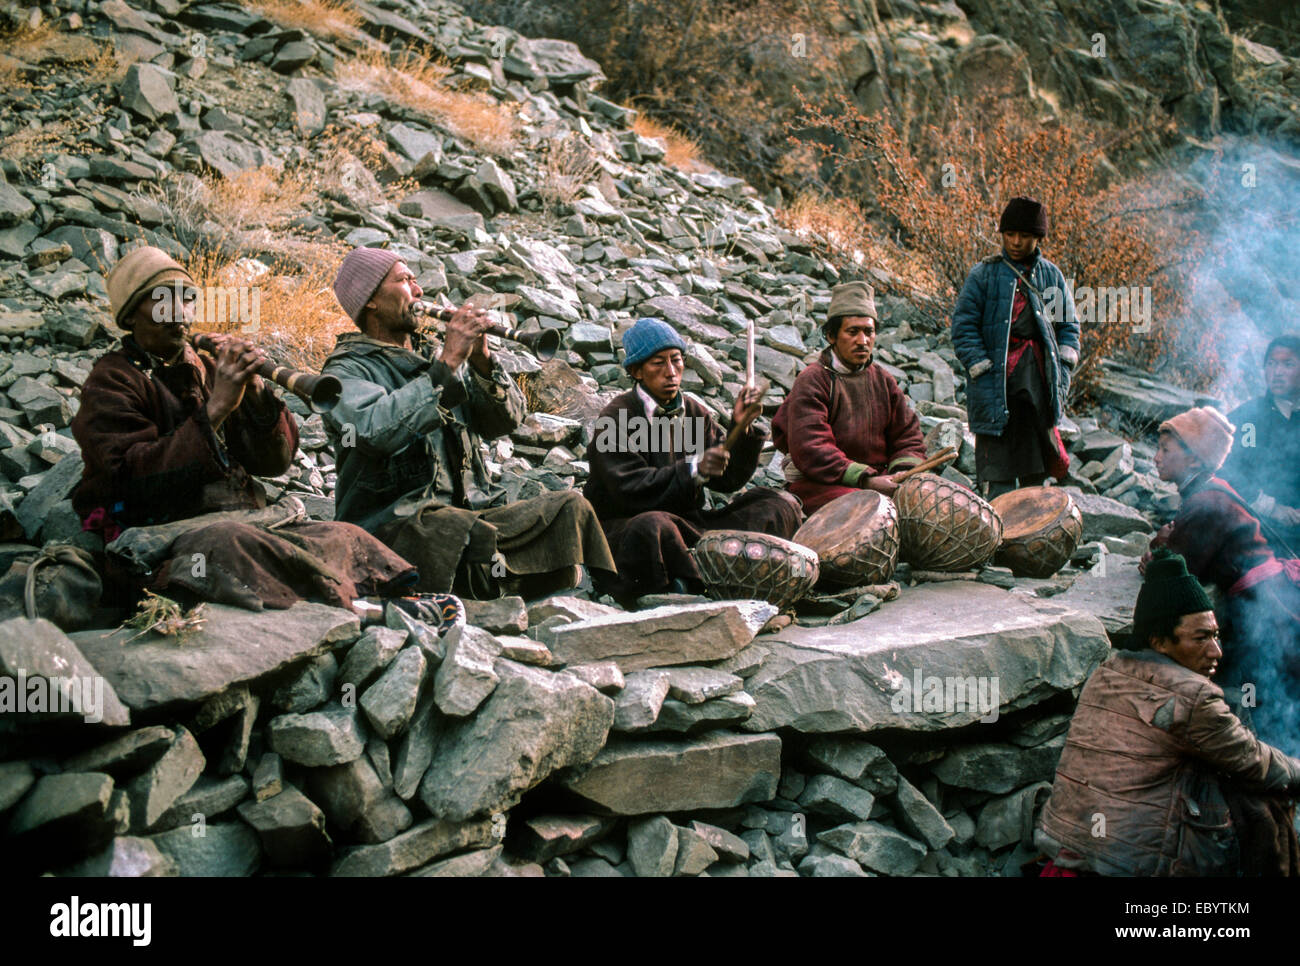 Local village musicians of low cast sit and play their clarinets and drums against a rocky backdrop in Ladakh India Stock Photo